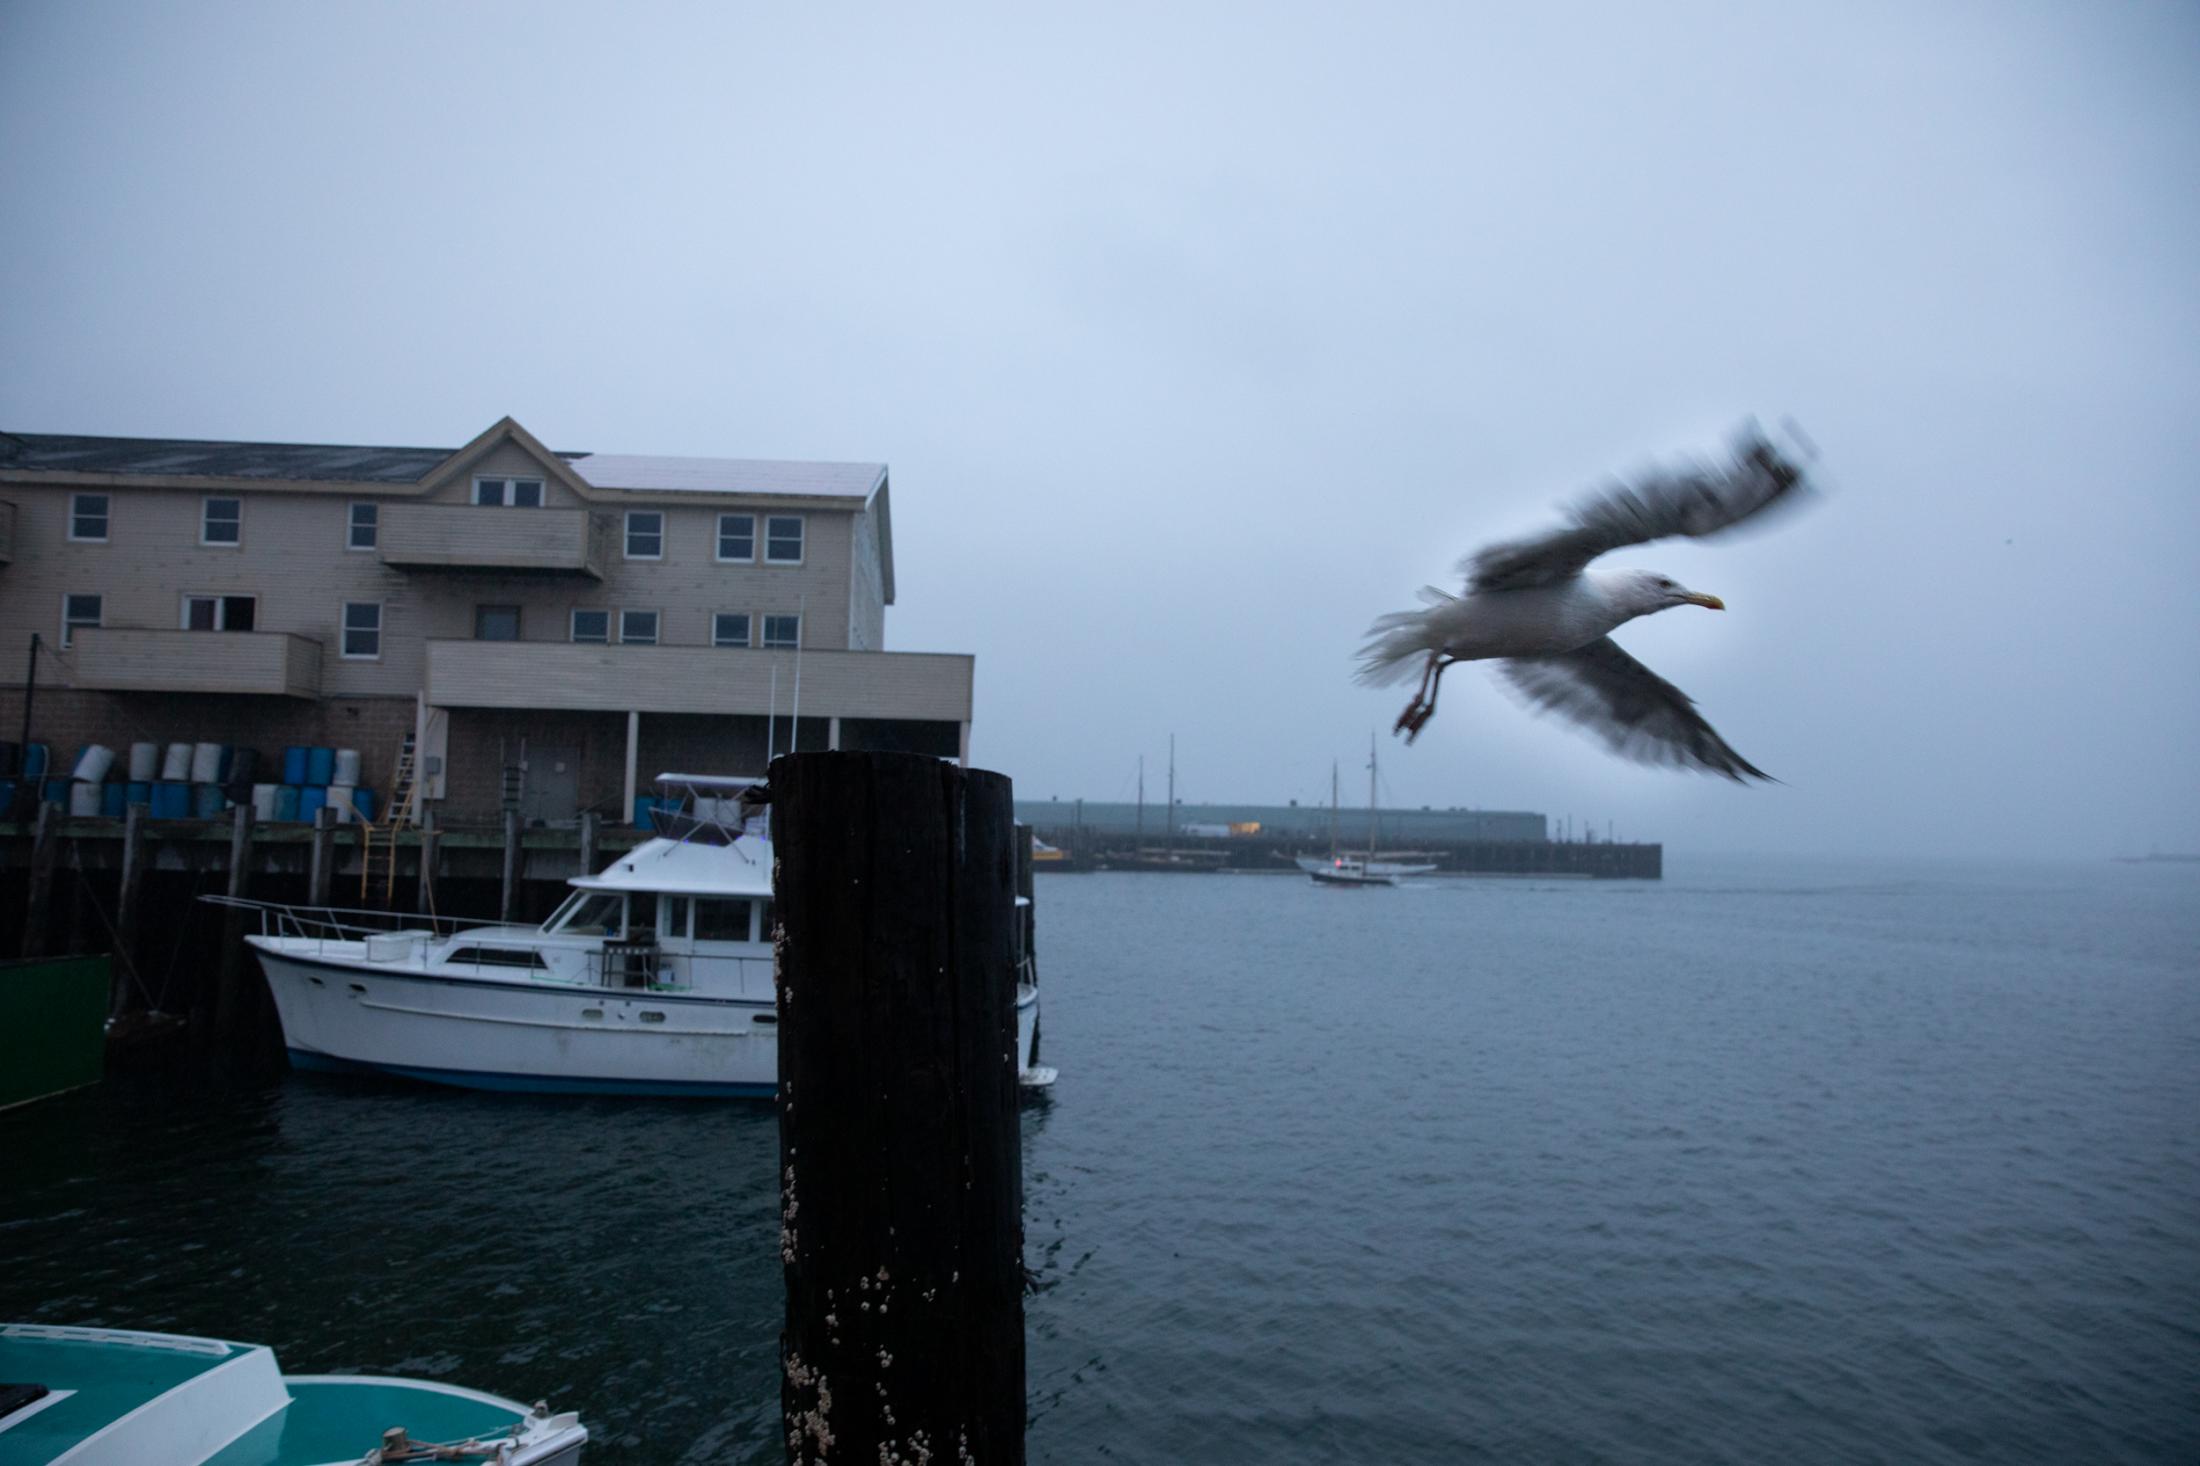 Belonging - A seagull flys away on a working dock in downtown...